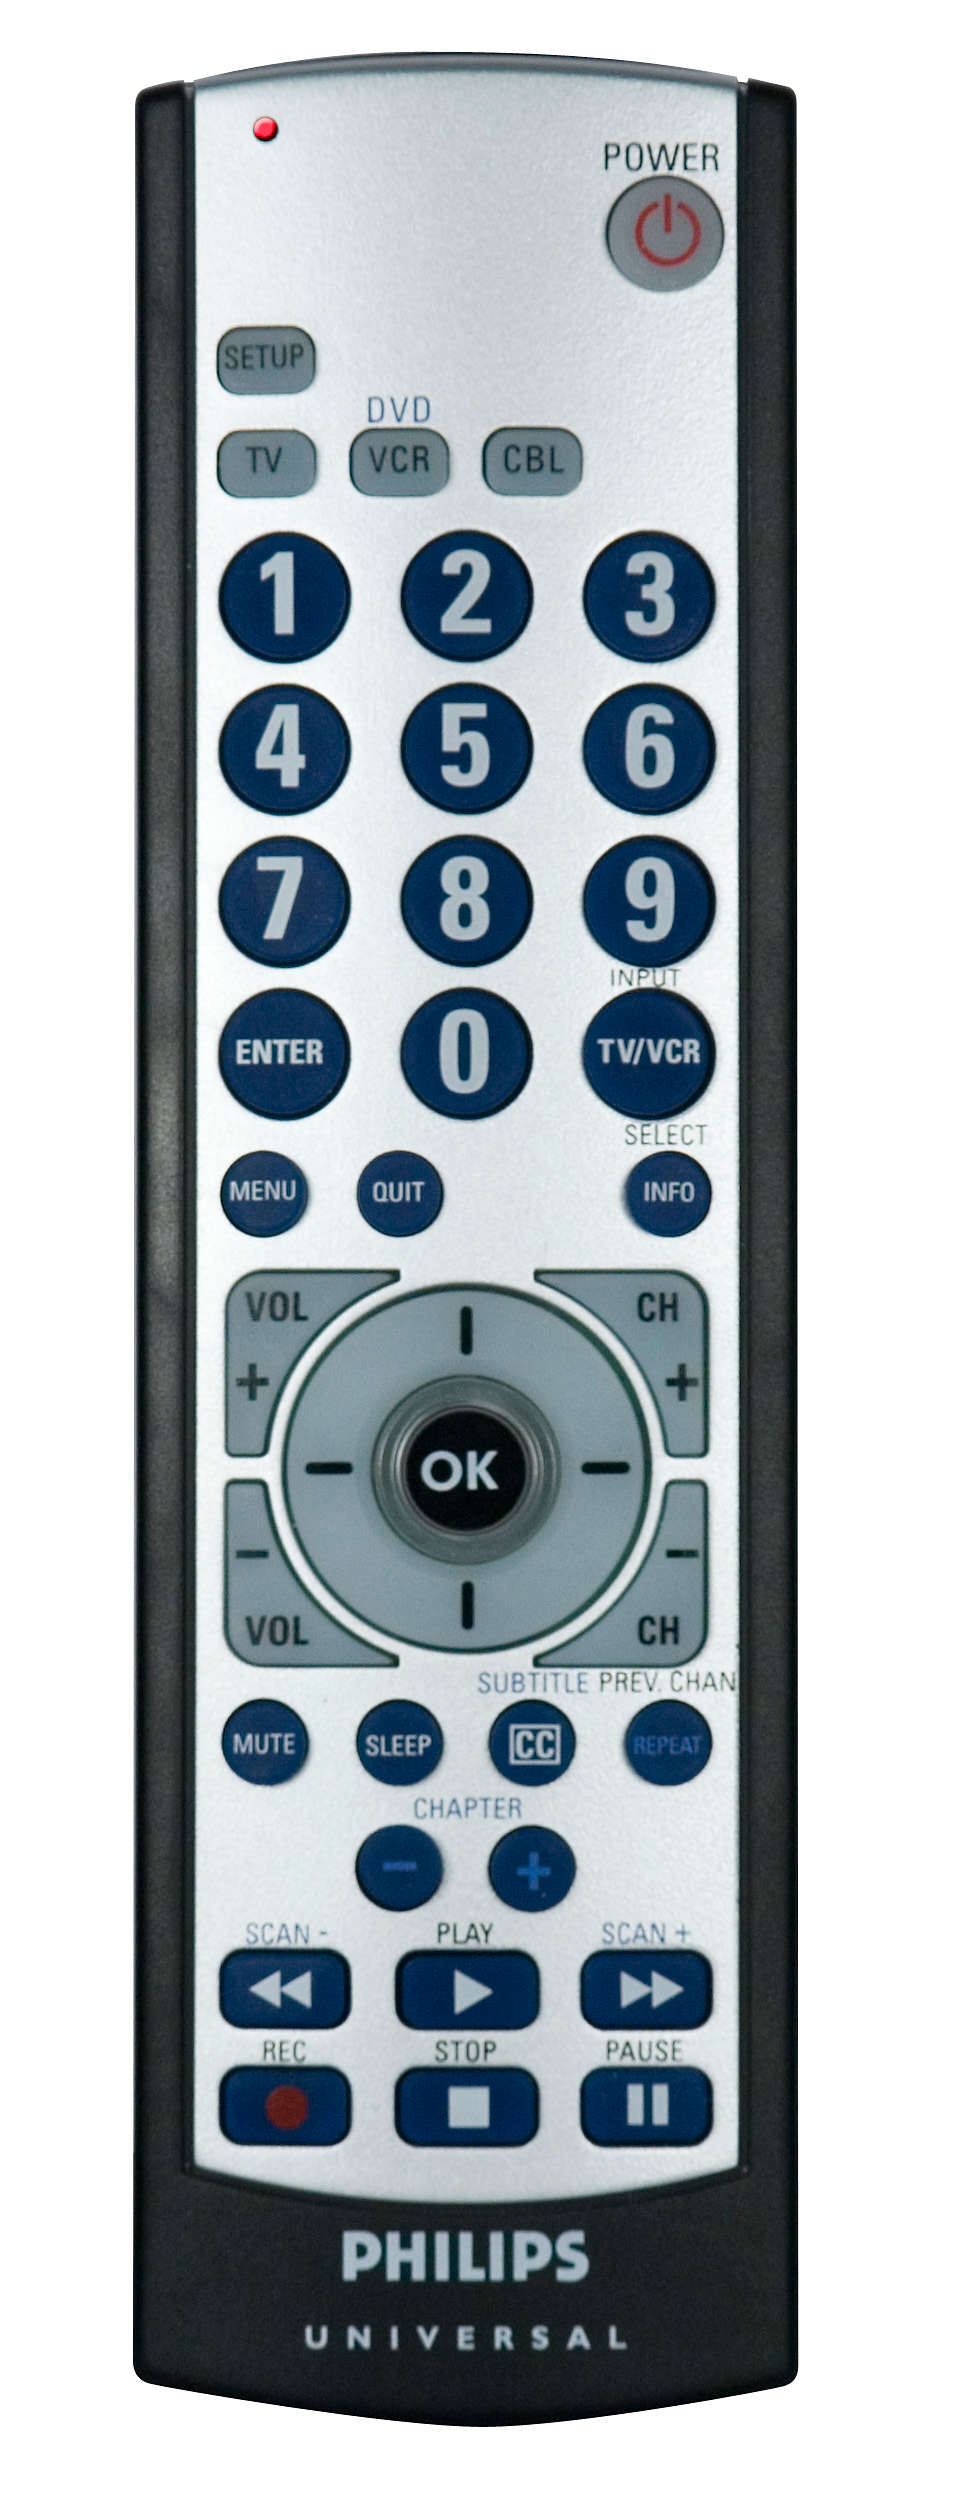 Ideal replacement for your lost or broken remote